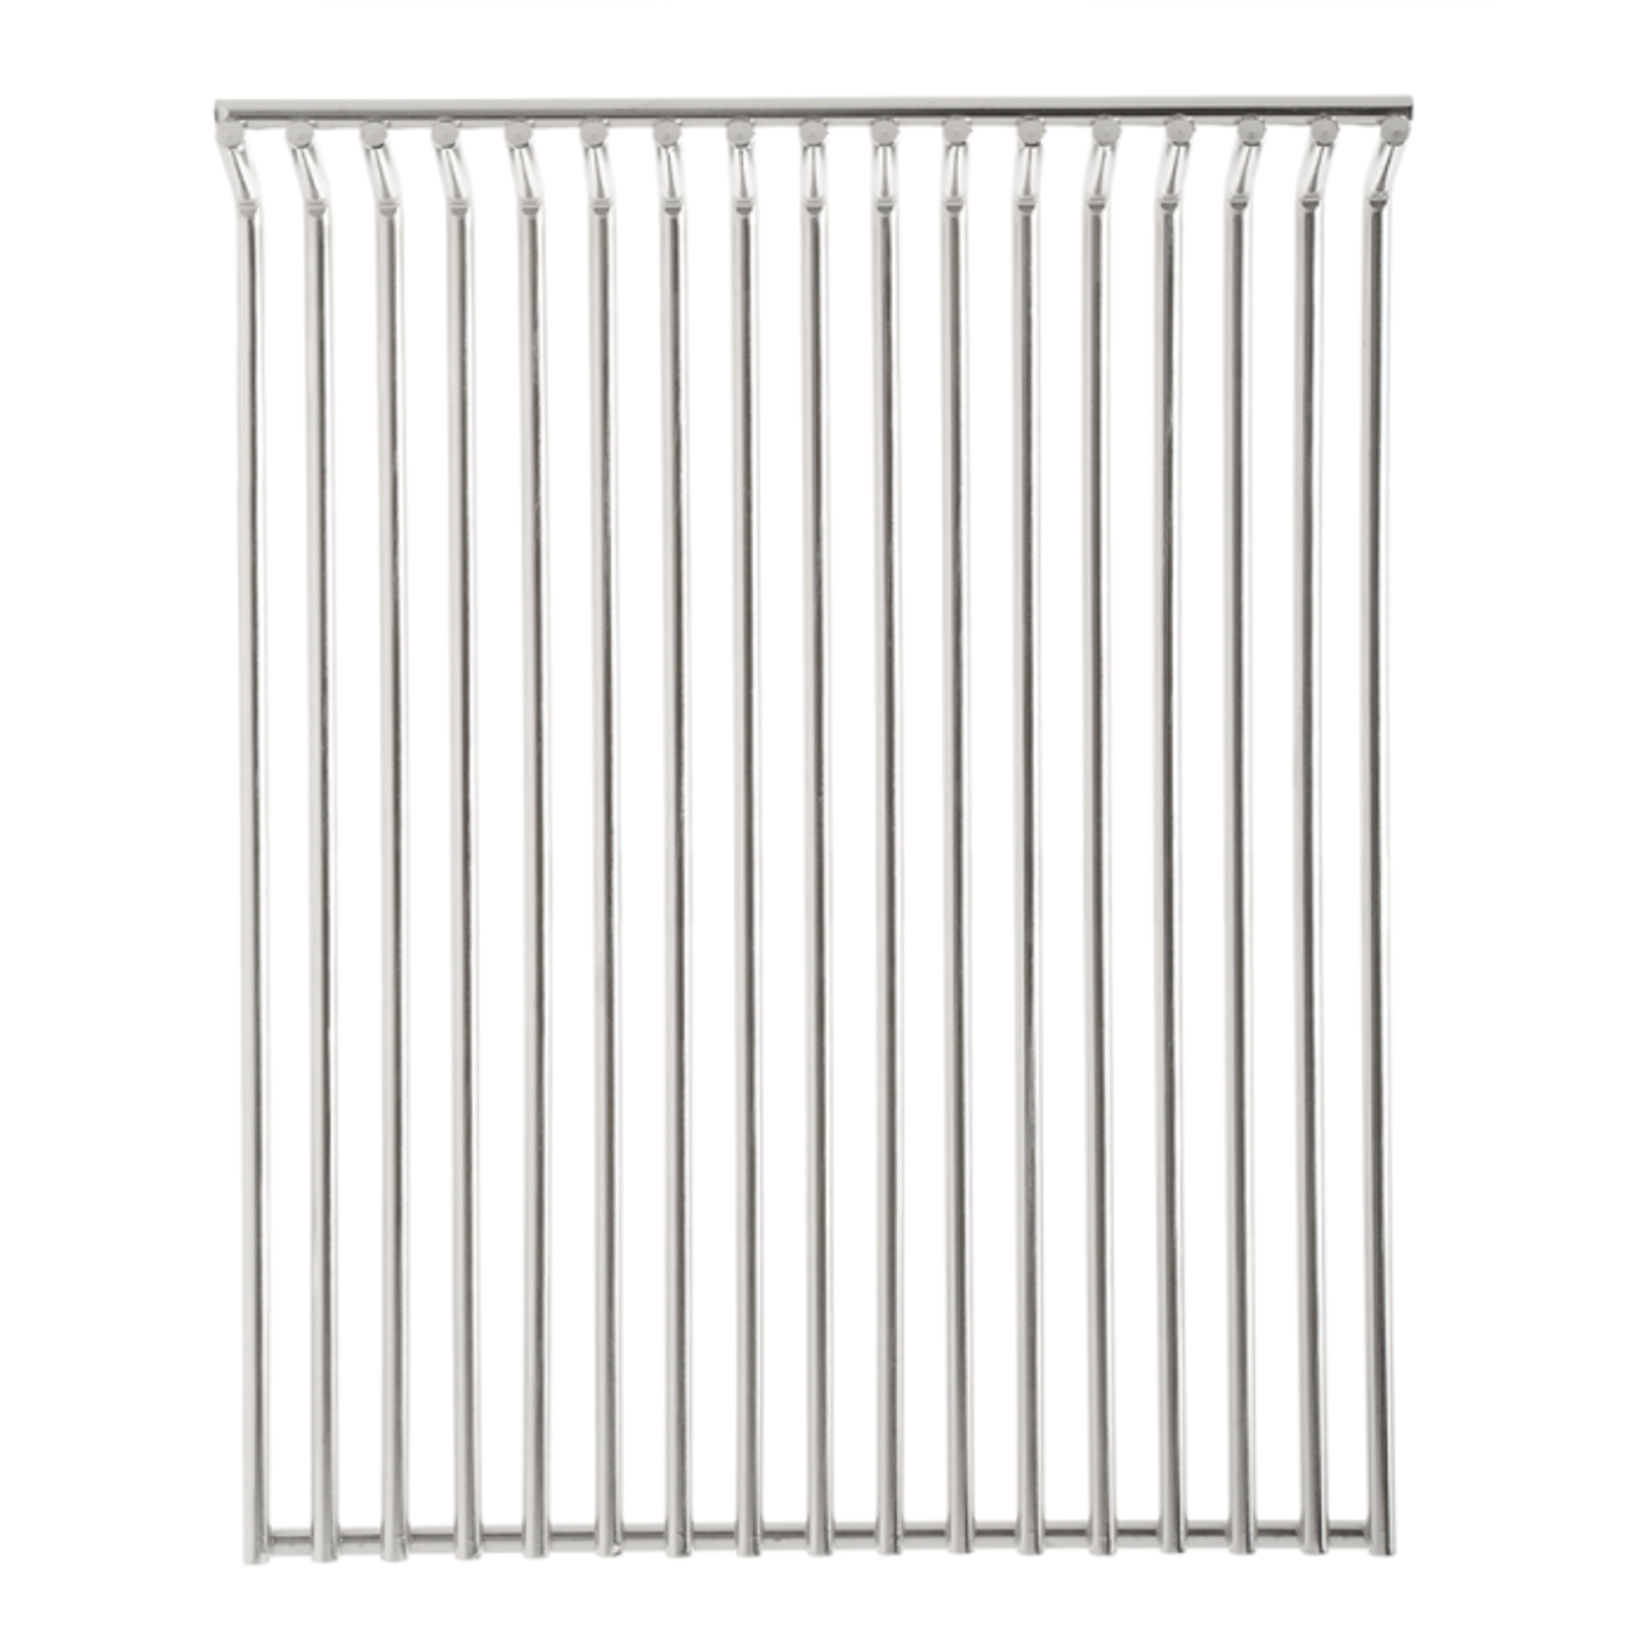 Broil King Porcelain wire grates for signet bbq